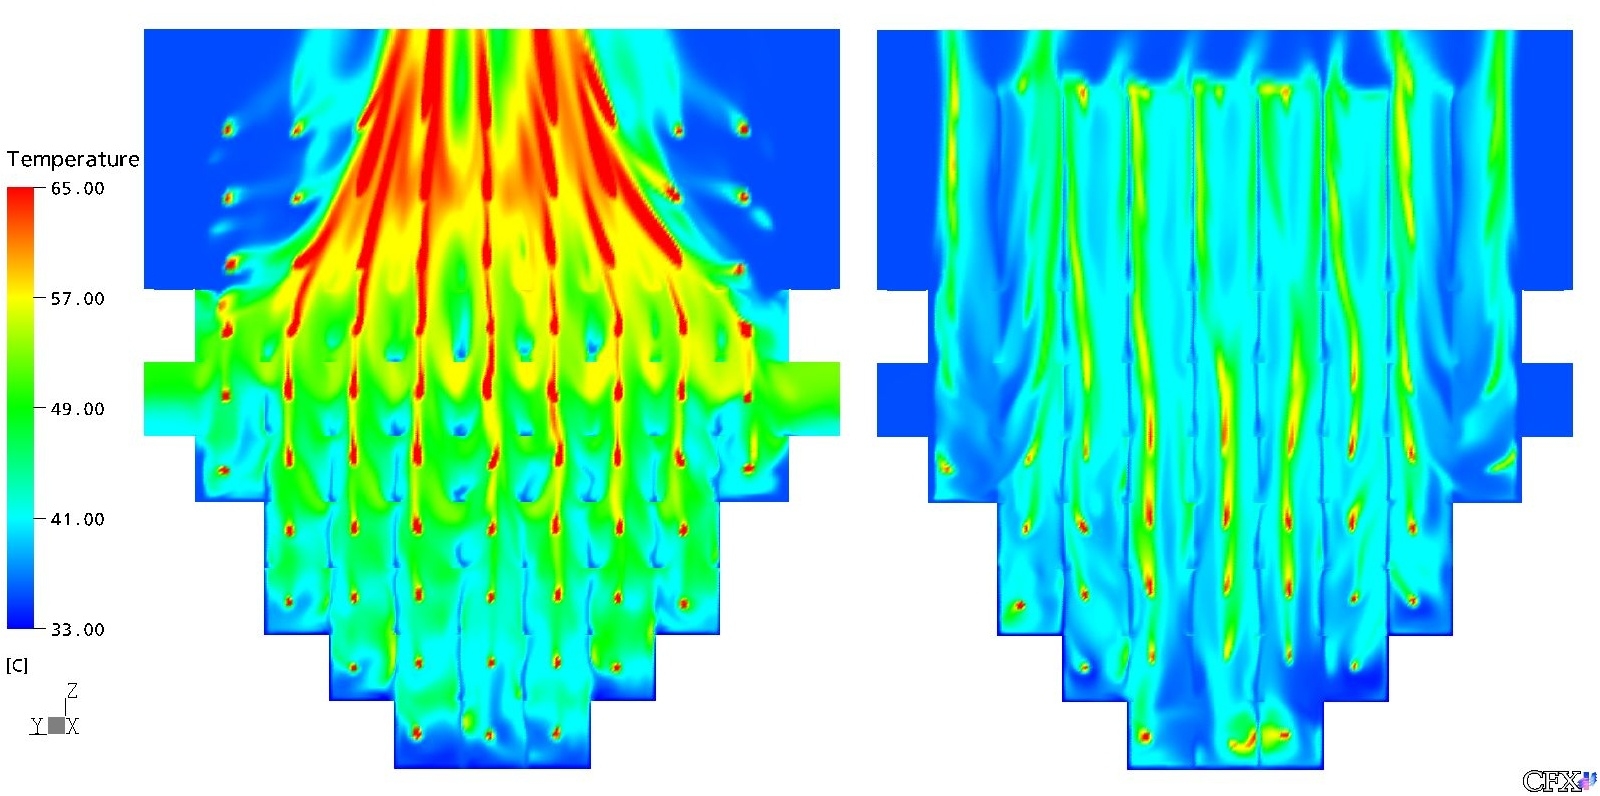 CFD computed temperature distribution in open top reefer cargo hold